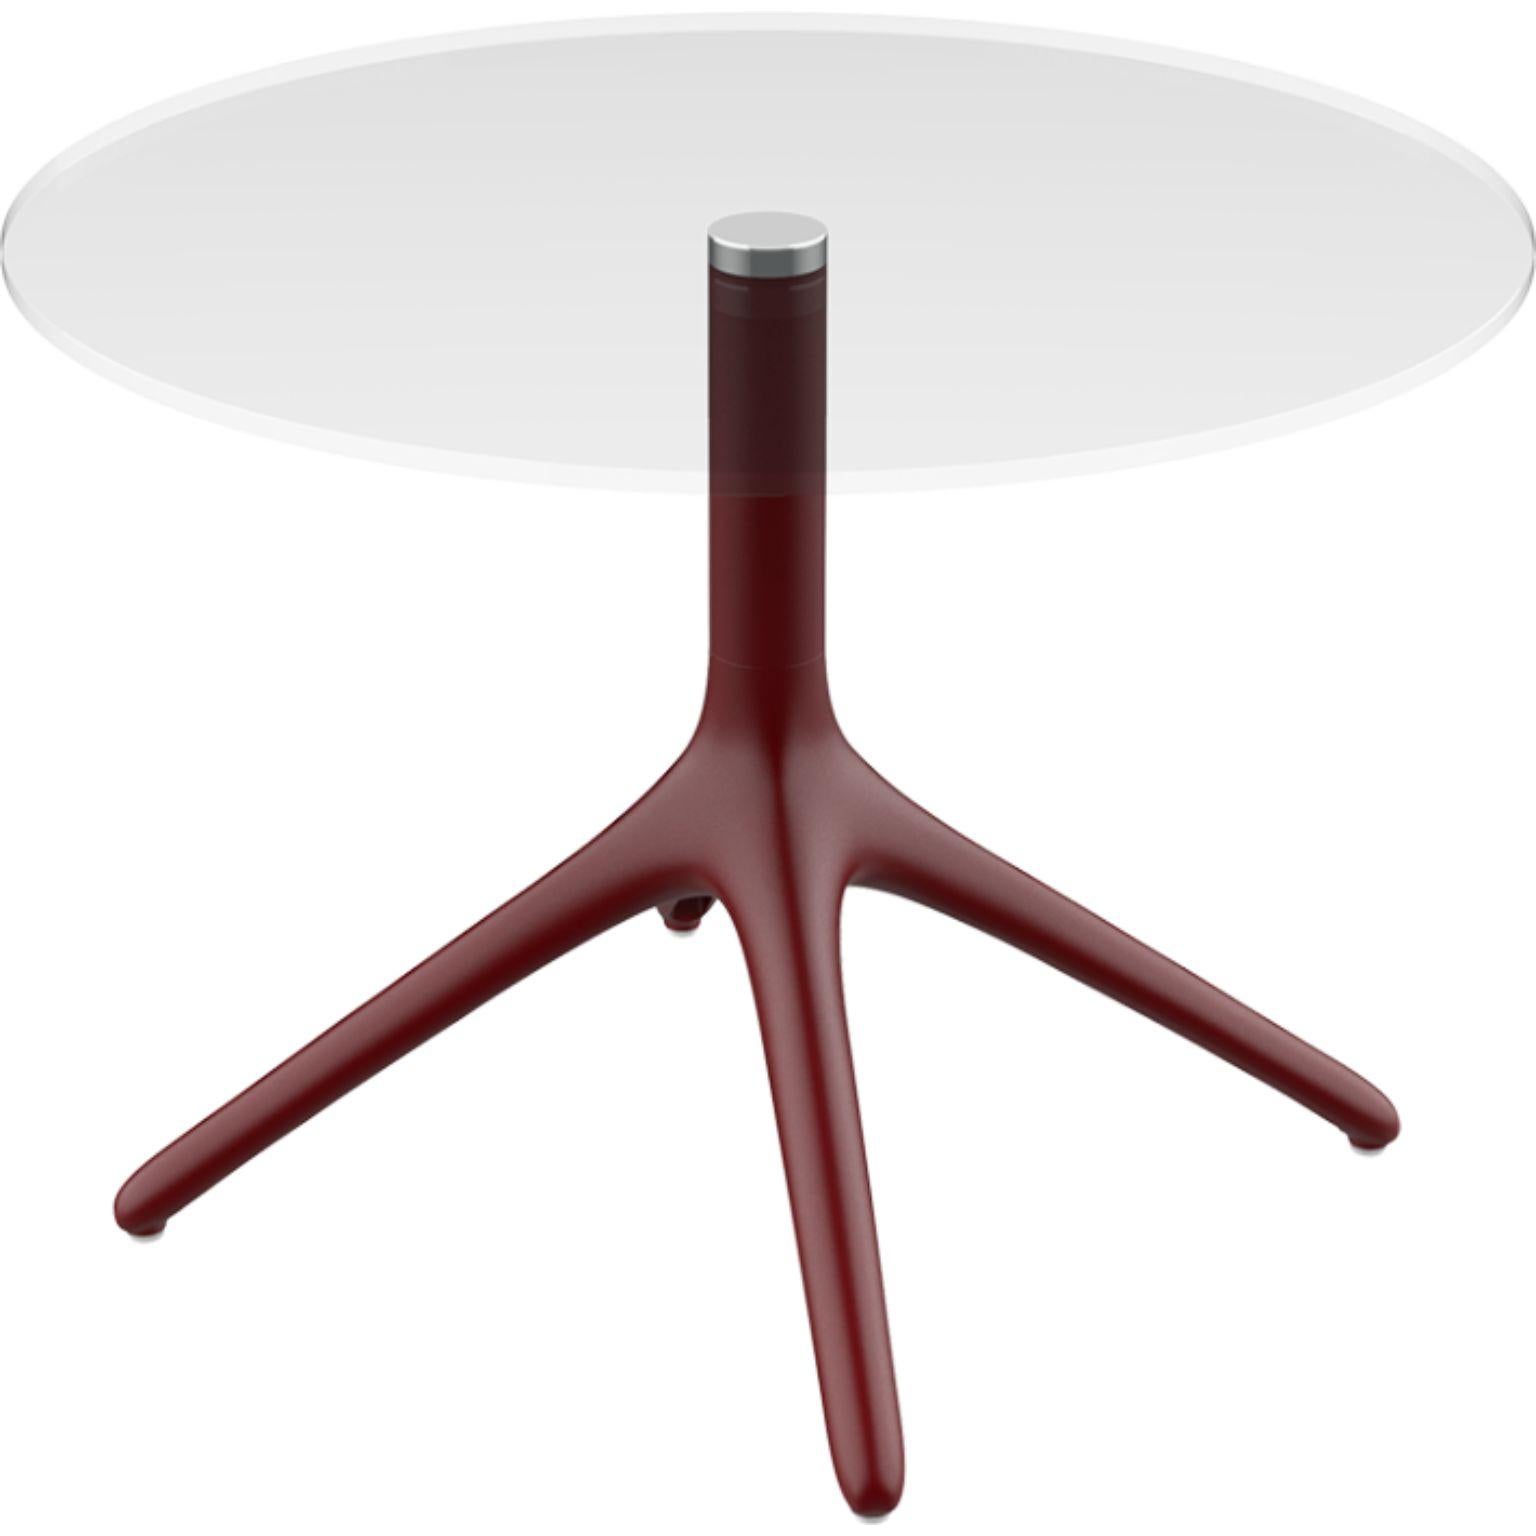 Uni burgundy table 50 by MOWEE
Dimensions: D 45.5 x H 50 cm
Material: Aluminium, tempered glass
Weight: 5 kg
Also available in different colours and finishes. Collapsable version available.

A table designed to be as versatile as possible and